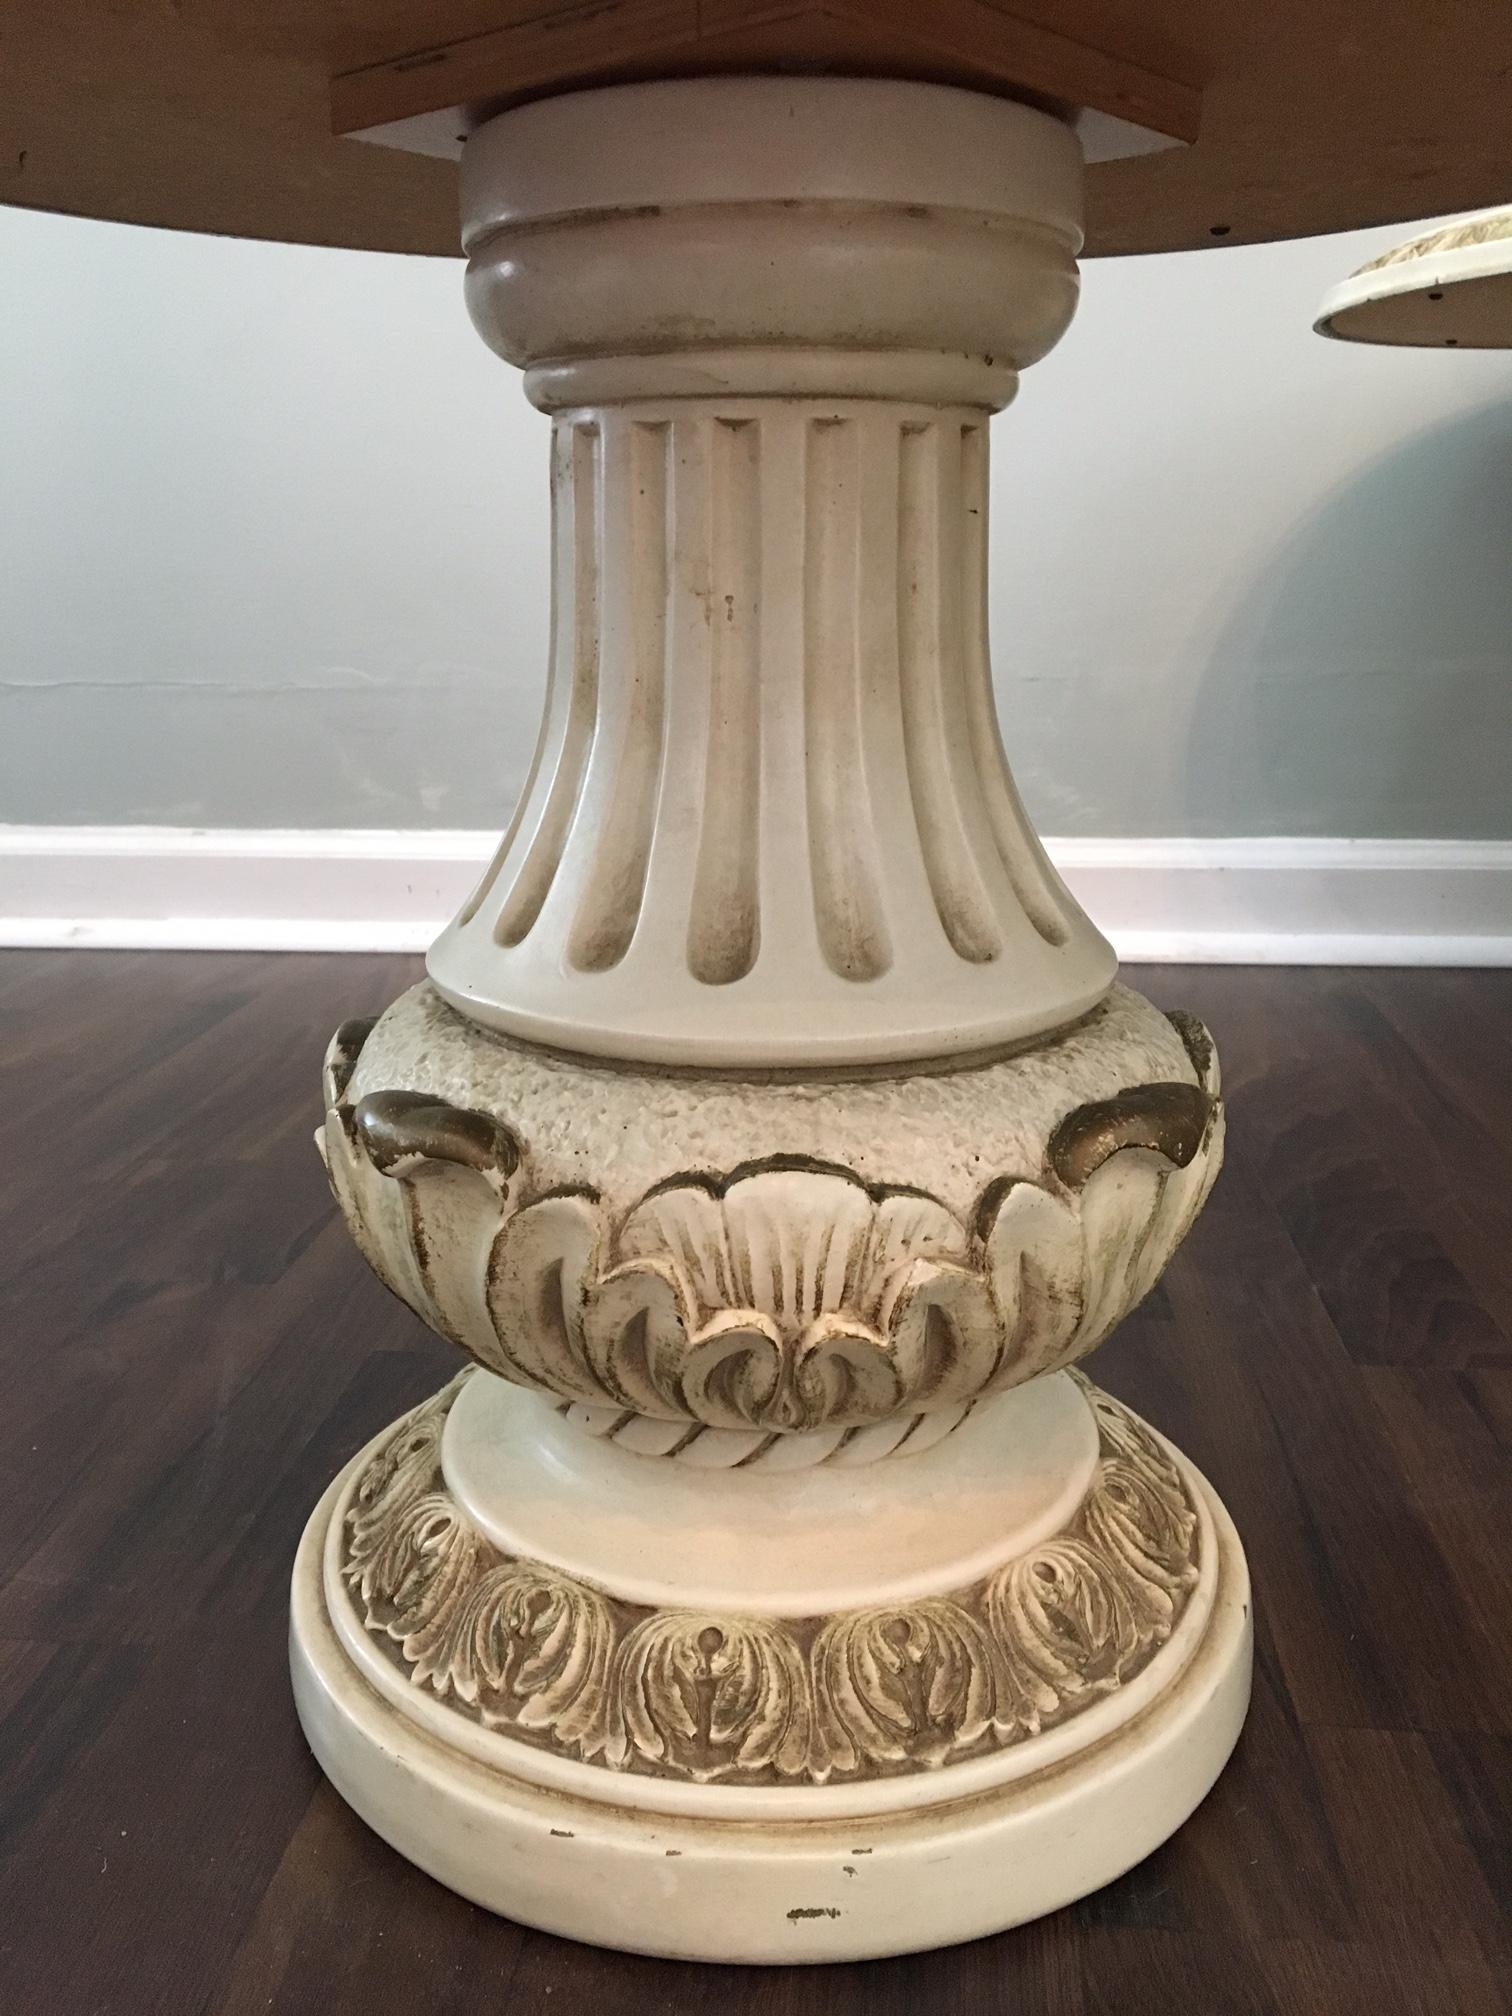 Pair of Italian style column side tables feature marbled glass tops and carved detailing. Perfect for your Hollywood Regency decor. Good vintage condition with one chip at base bottom rear.